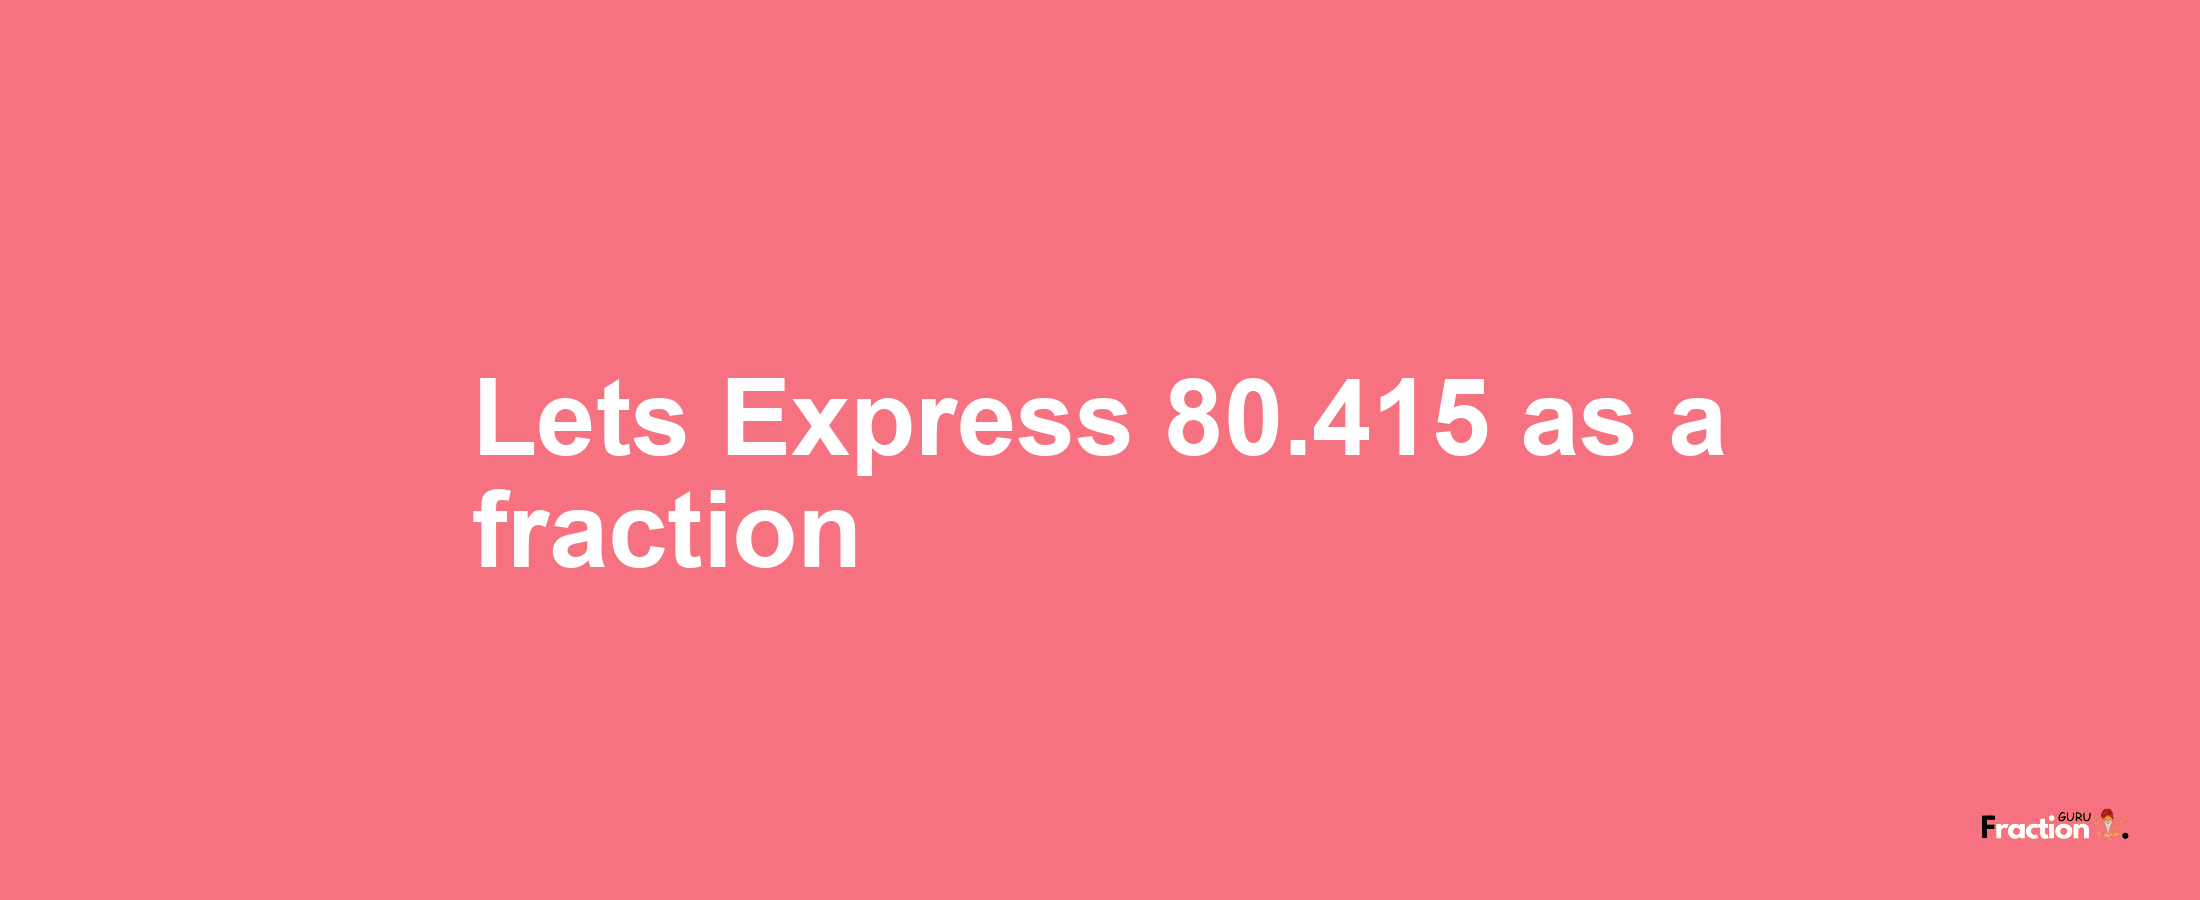 Lets Express 80.415 as afraction